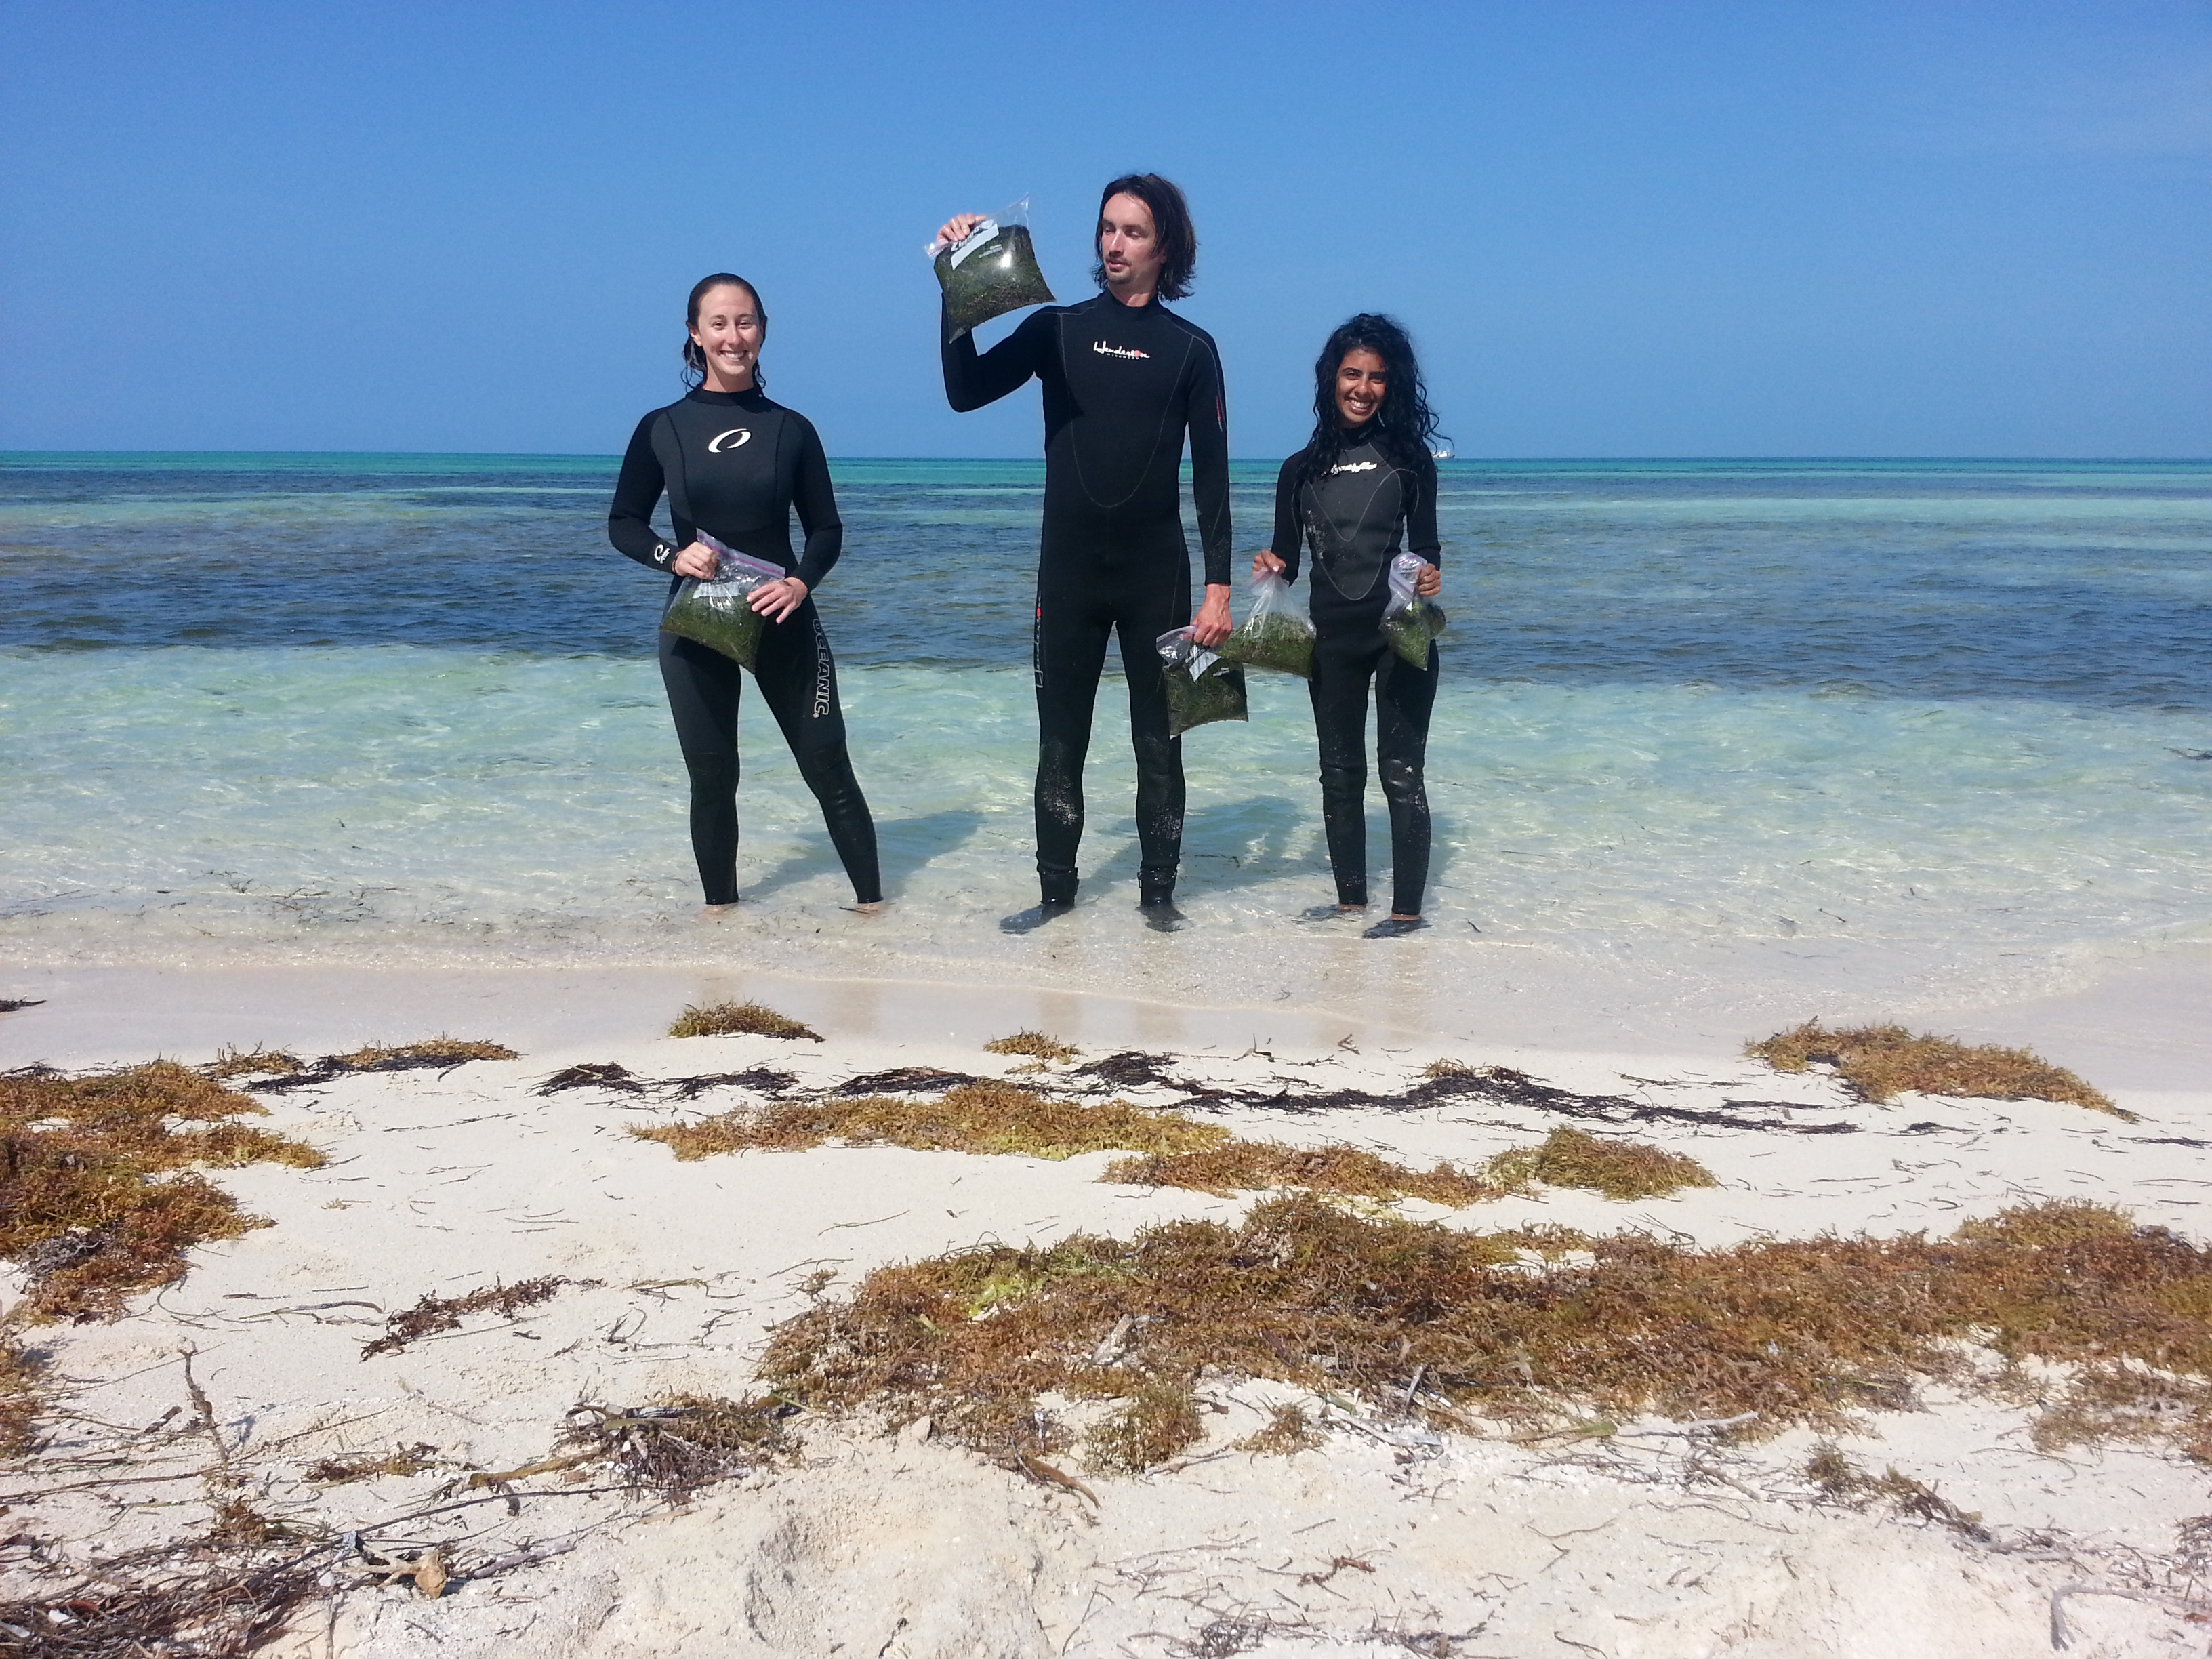 UF scientists Michelle Bousquet, Ph.D., Hendrik Luesch, Ph.D., and Fatma Al-Awadhi, Ph.D.,  collected seaweed off the coast of Boca Grande Key, an island about 15 miles west of Key West.